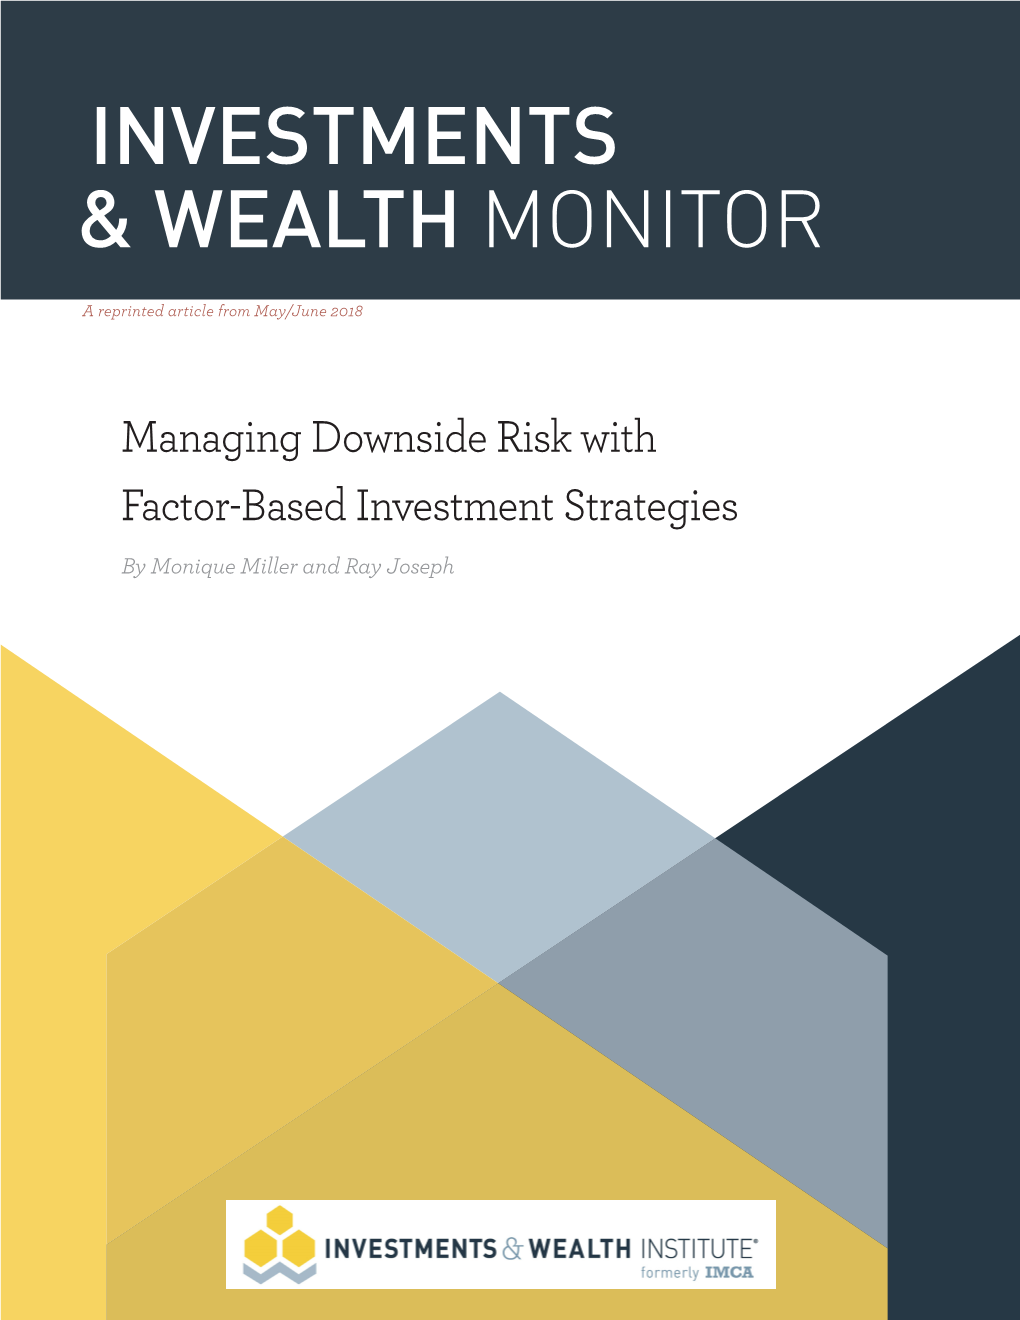 Managing Downside Risk with Factor-Based Investment Strategies